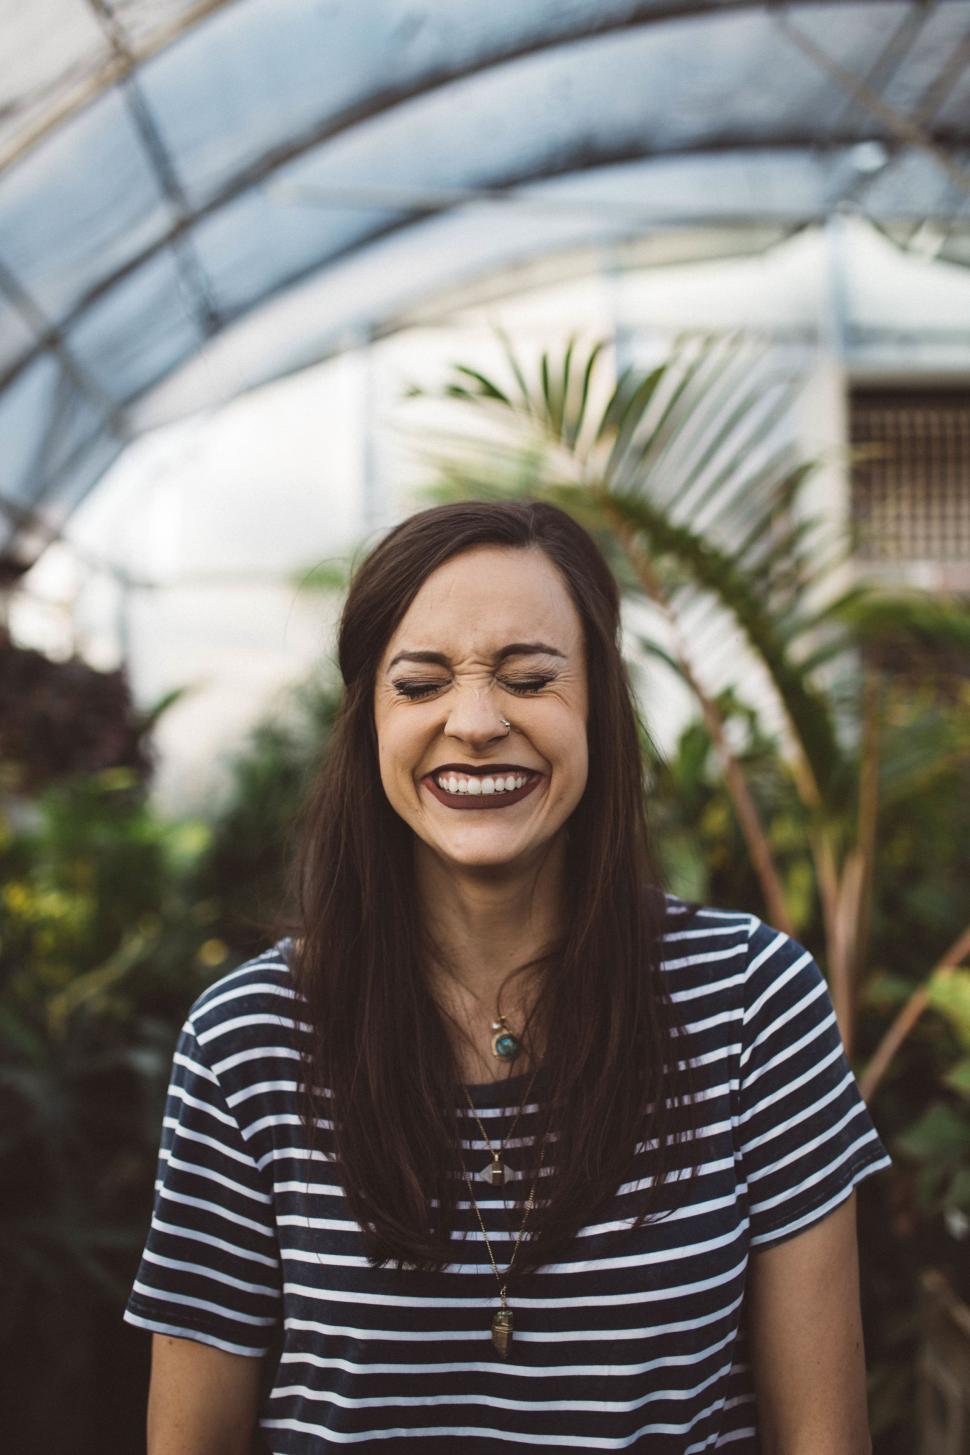 Free Image of Smiling Woman With Long Hair in Greenhouse 